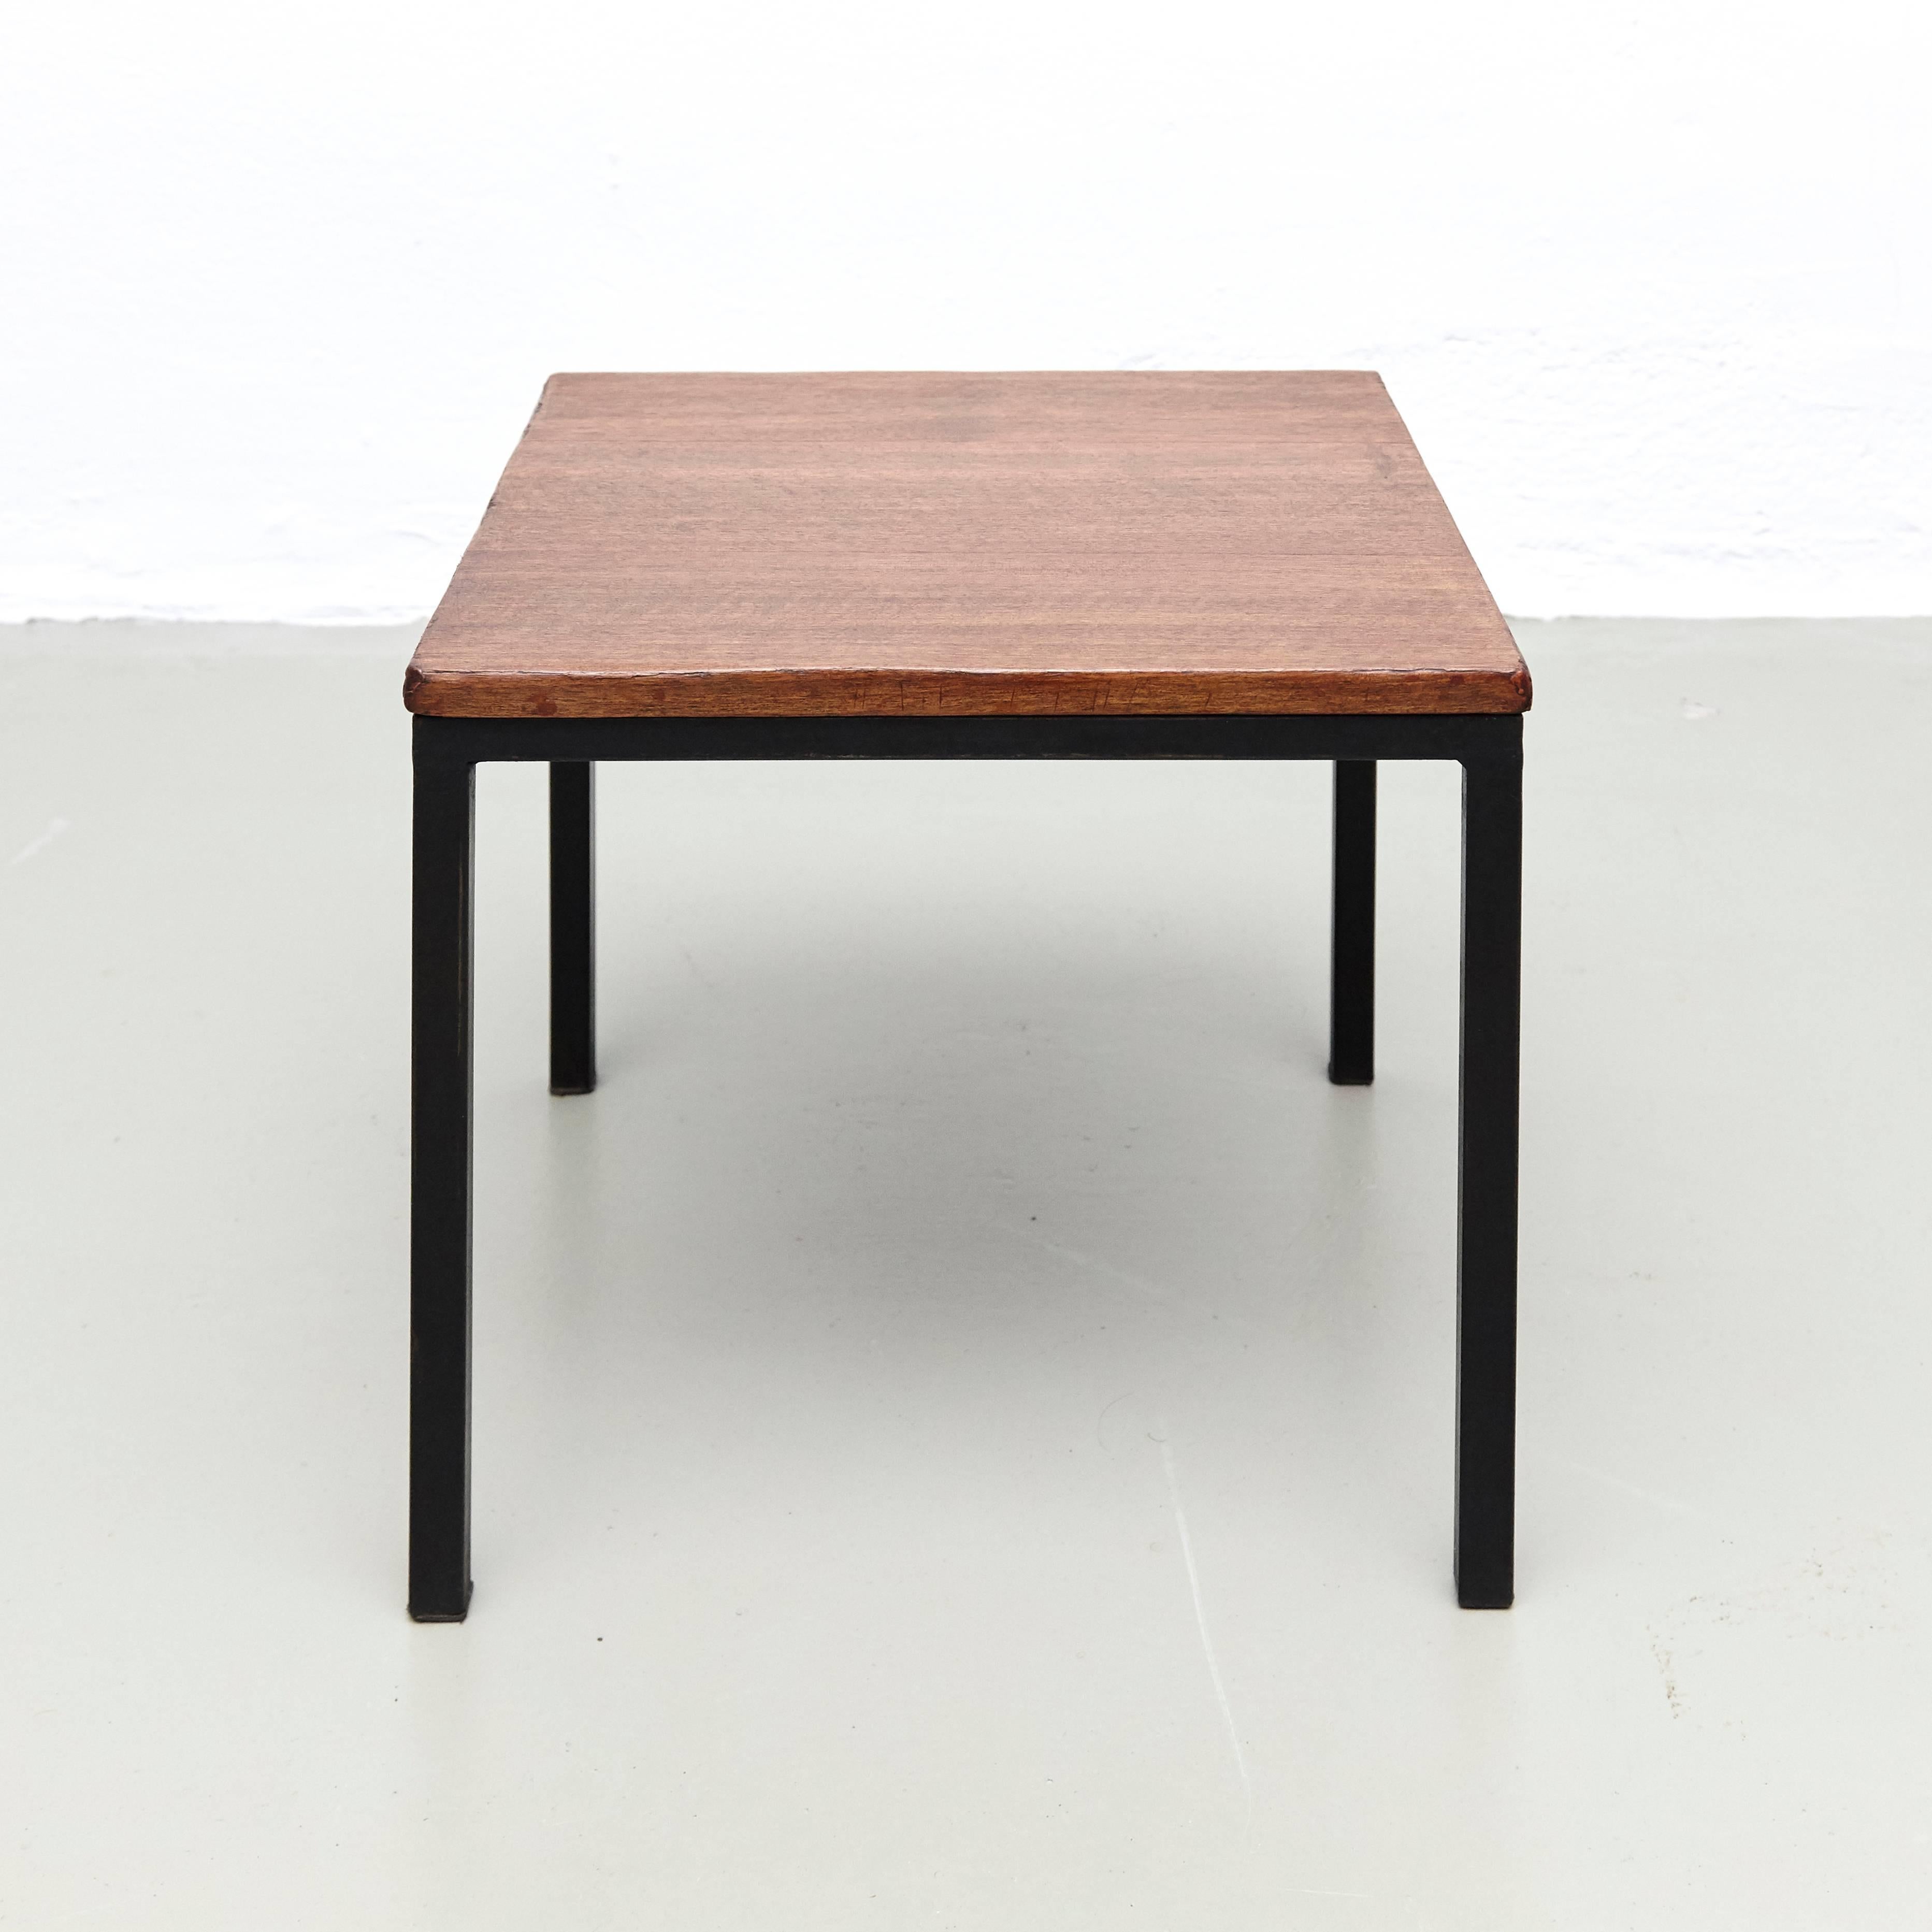 T-angle side table designed by Florence Knoll and manufactured by Knoll. 
Metal legs and wood tabletops. 

In good original condition, with minor wear consistent with age and use.

Florence Knoll Bassett is an American architect and furniture